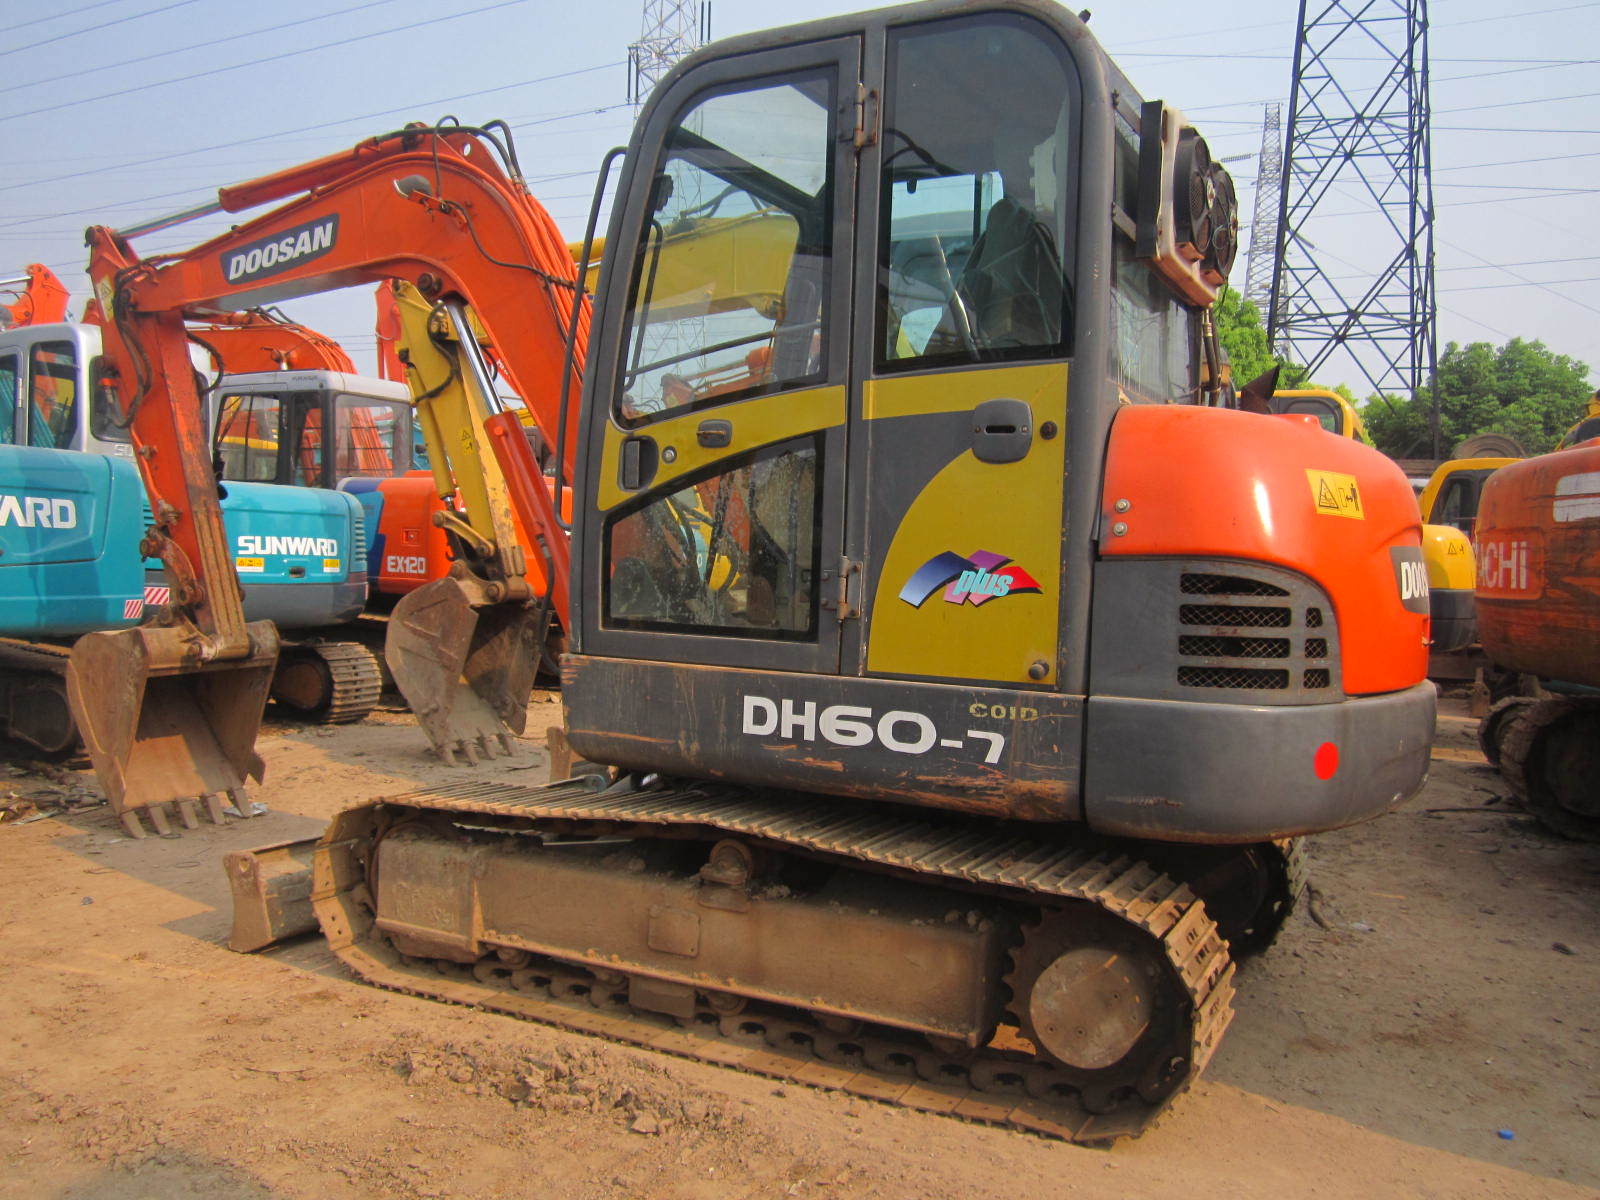 Used Daewoo/Doosan 60-7/Dh300LC-7 Excavator for Sale, with High Quality in Low Price